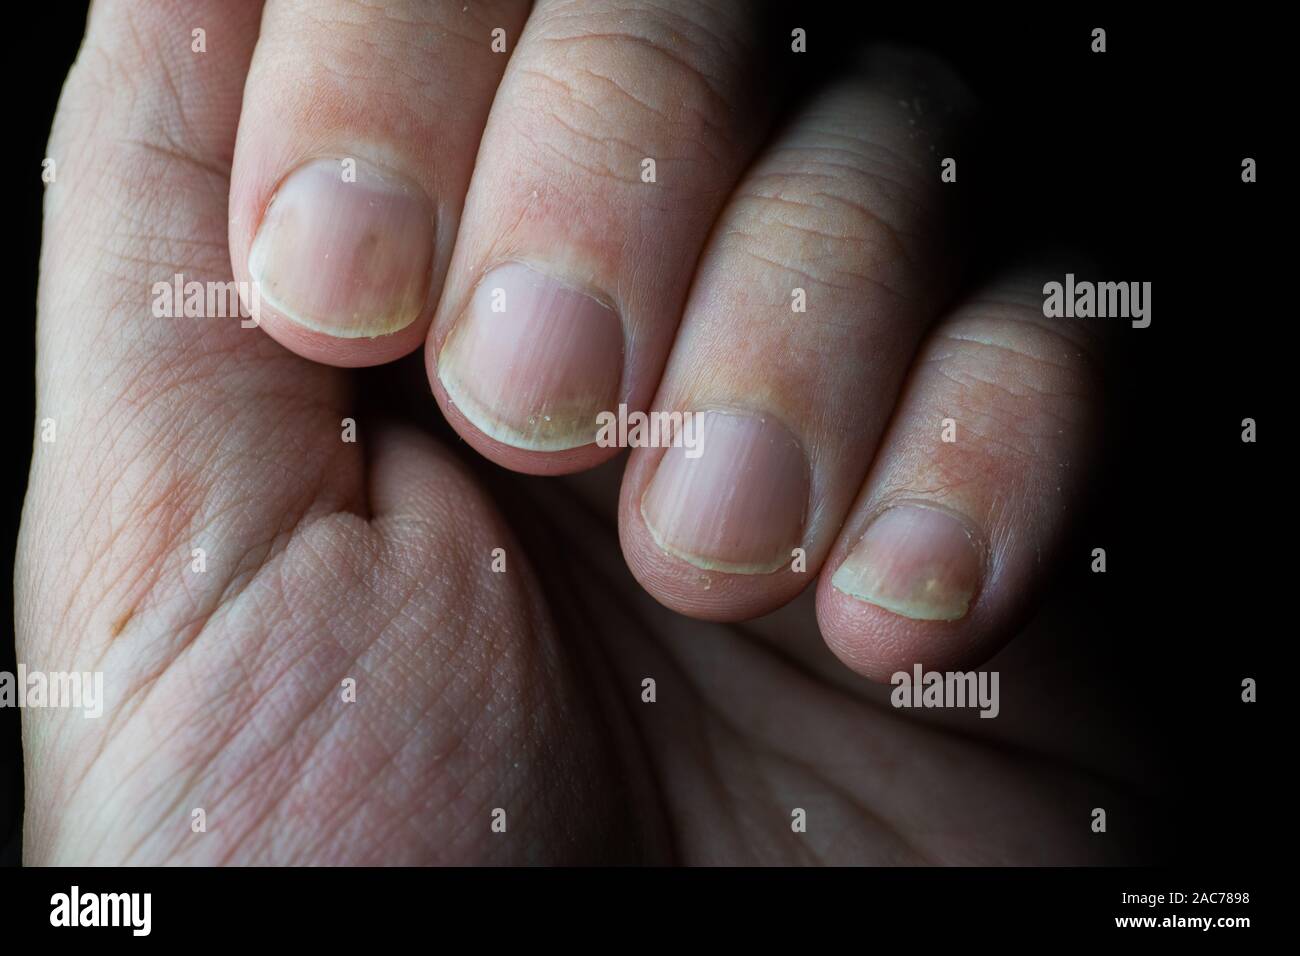 Nail Diseases - Types and Common Treatment Options